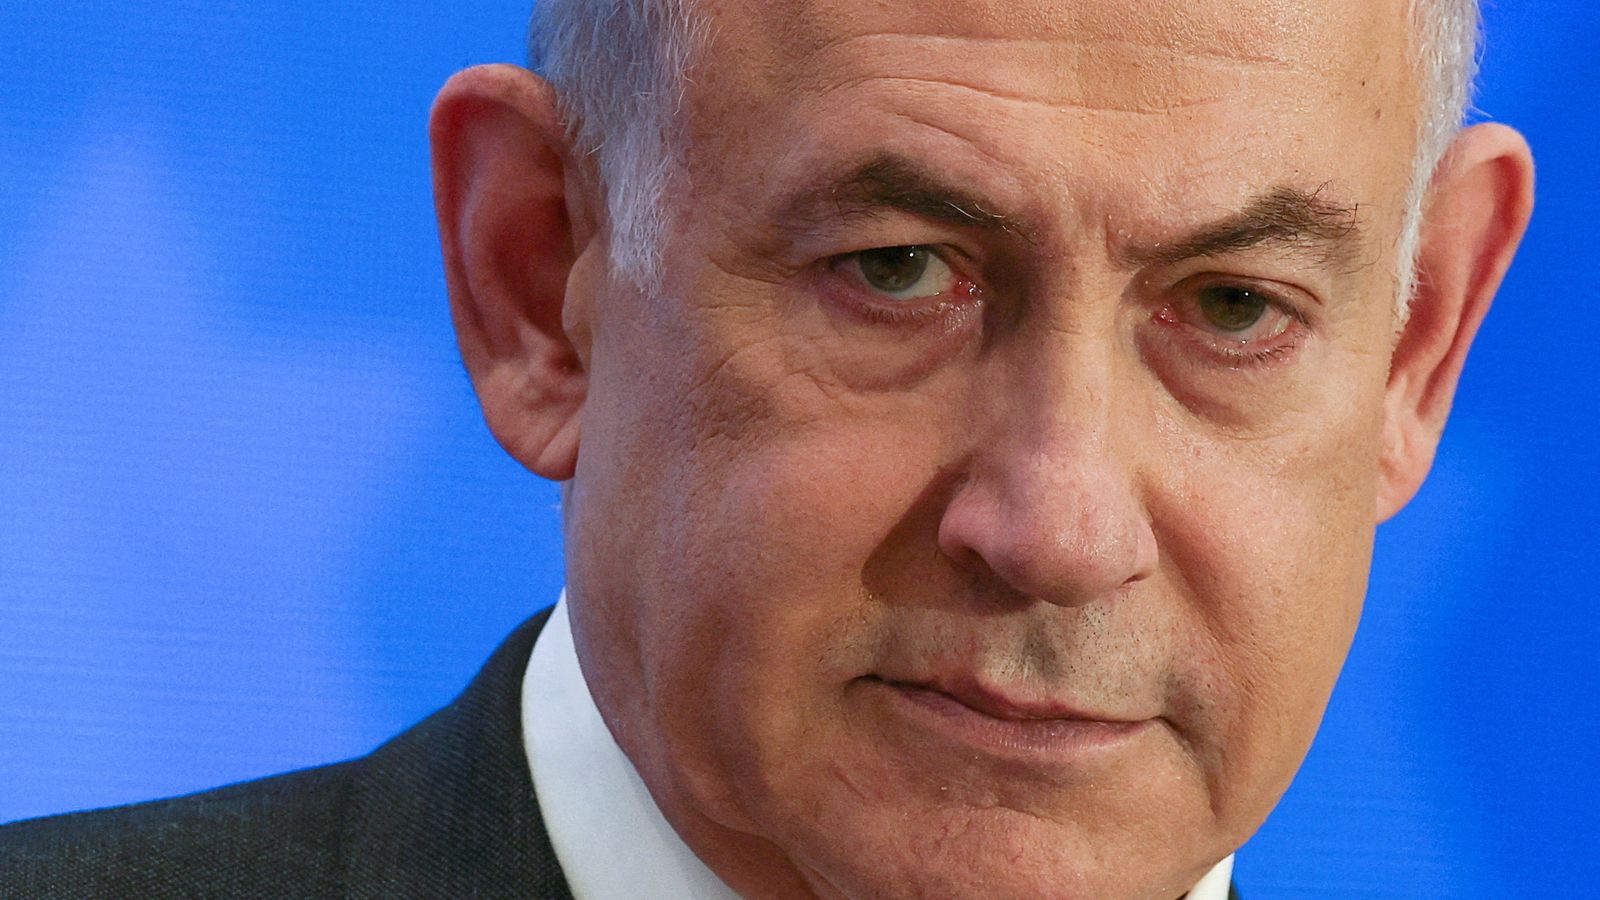 Netanyahu rejects ceasefire that would ‘leave Hamas intact’ – as Israeli cabinet votes to close Al Jazeera office | World News